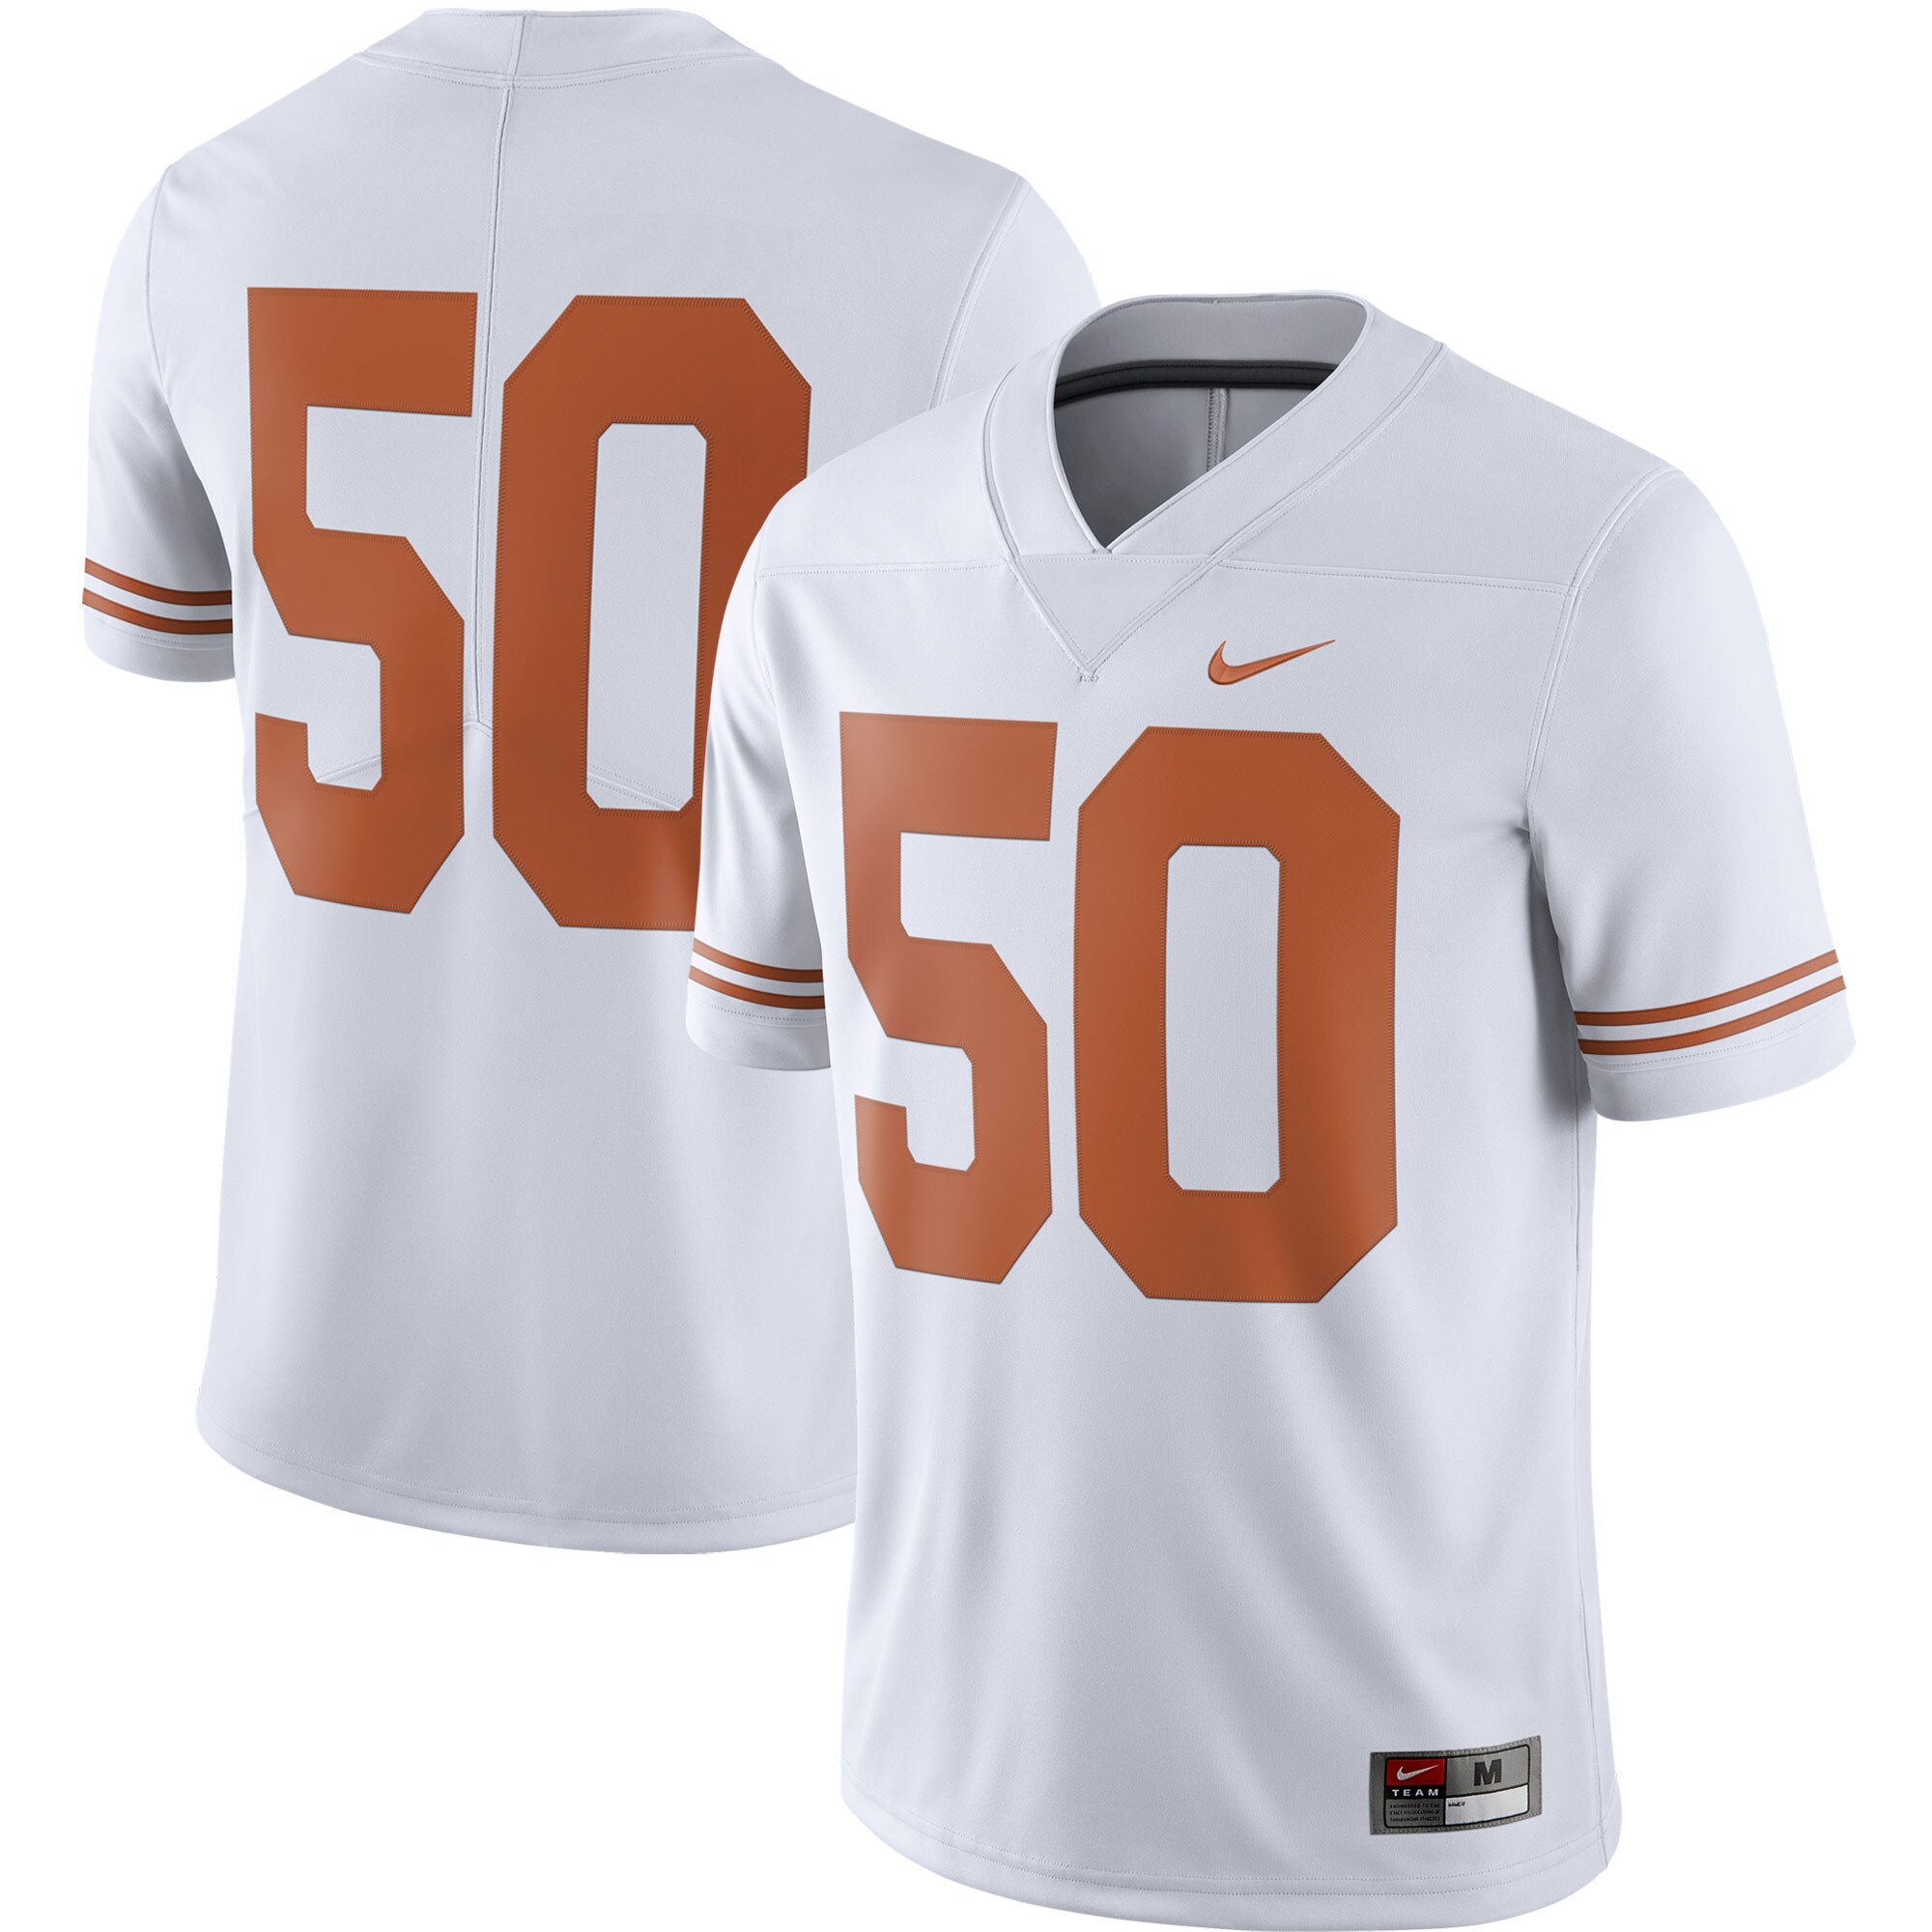 #50 Texas Longhorns College Alternate Limited Jersey - White For Youth Women Men